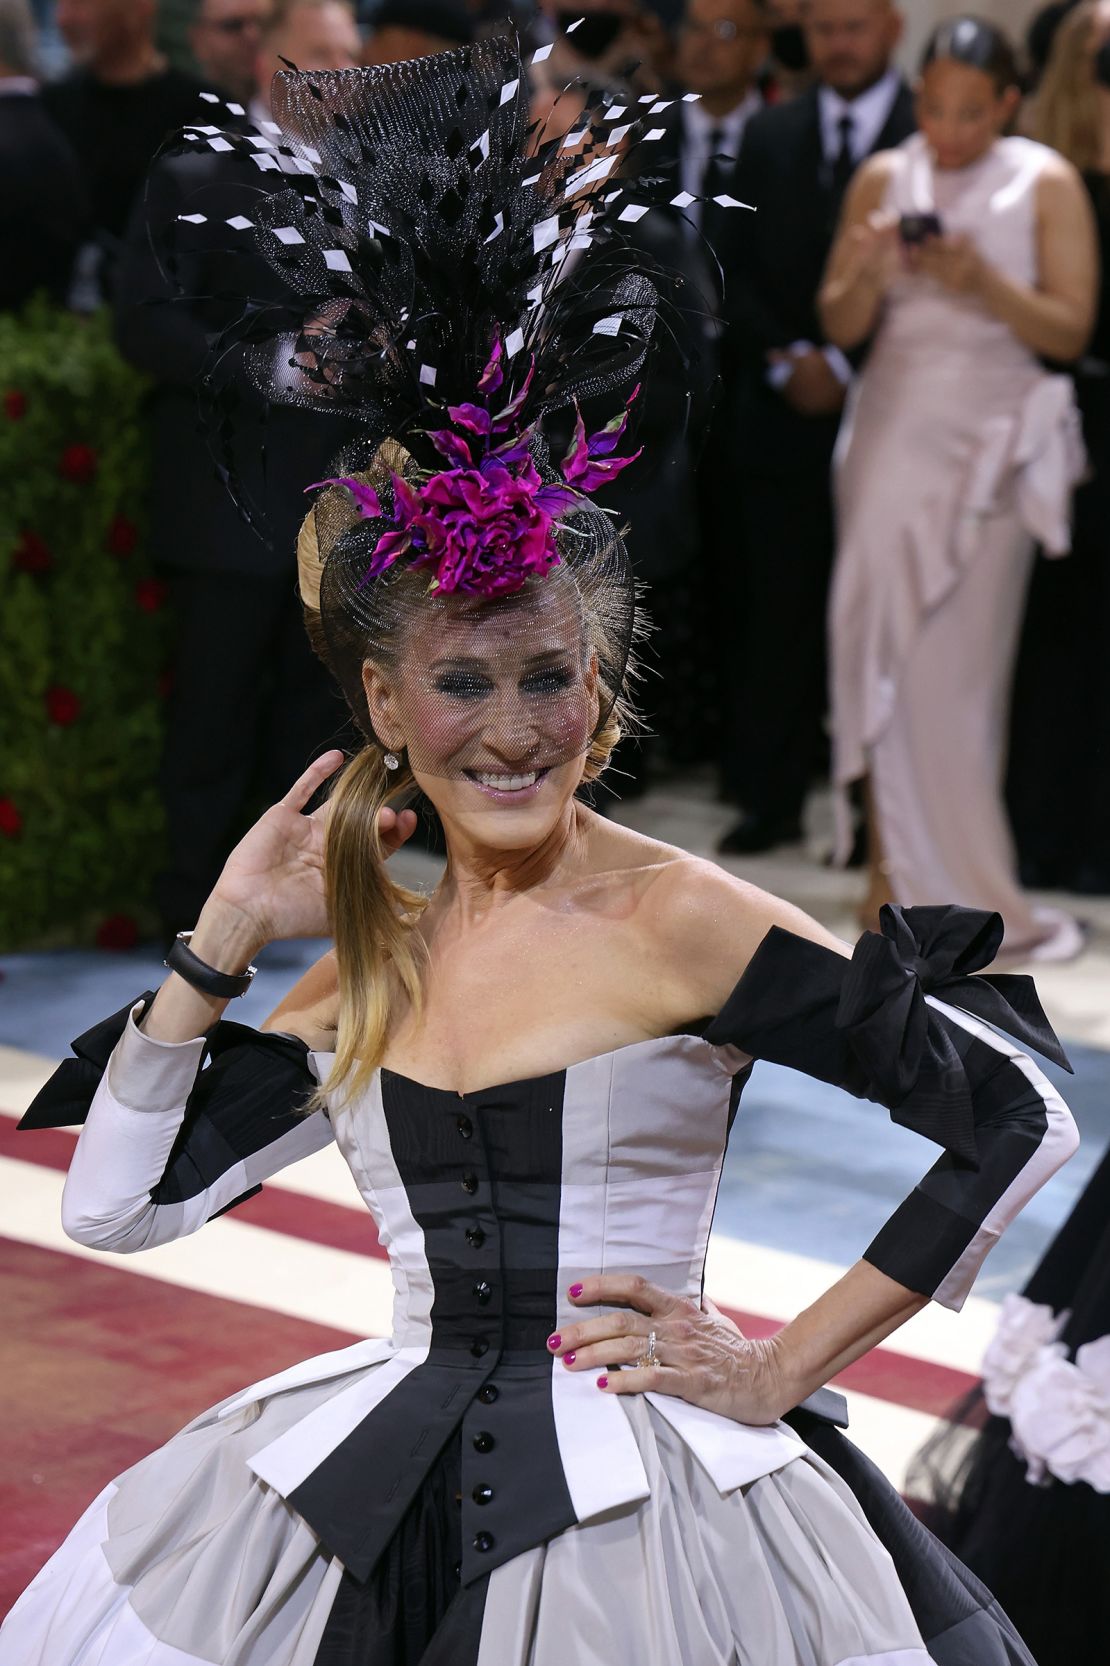 Sarah Jessica Parker's Christopher John Rogers gown was modeled after an outfit made by Elizabeth Hodds Keckly, a Black designer who worked in the 19th century.